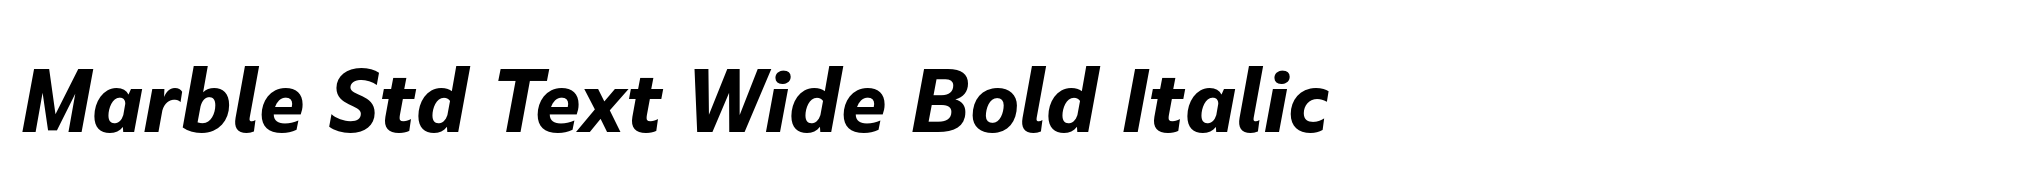 Marble Std Text Wide Bold Italic image